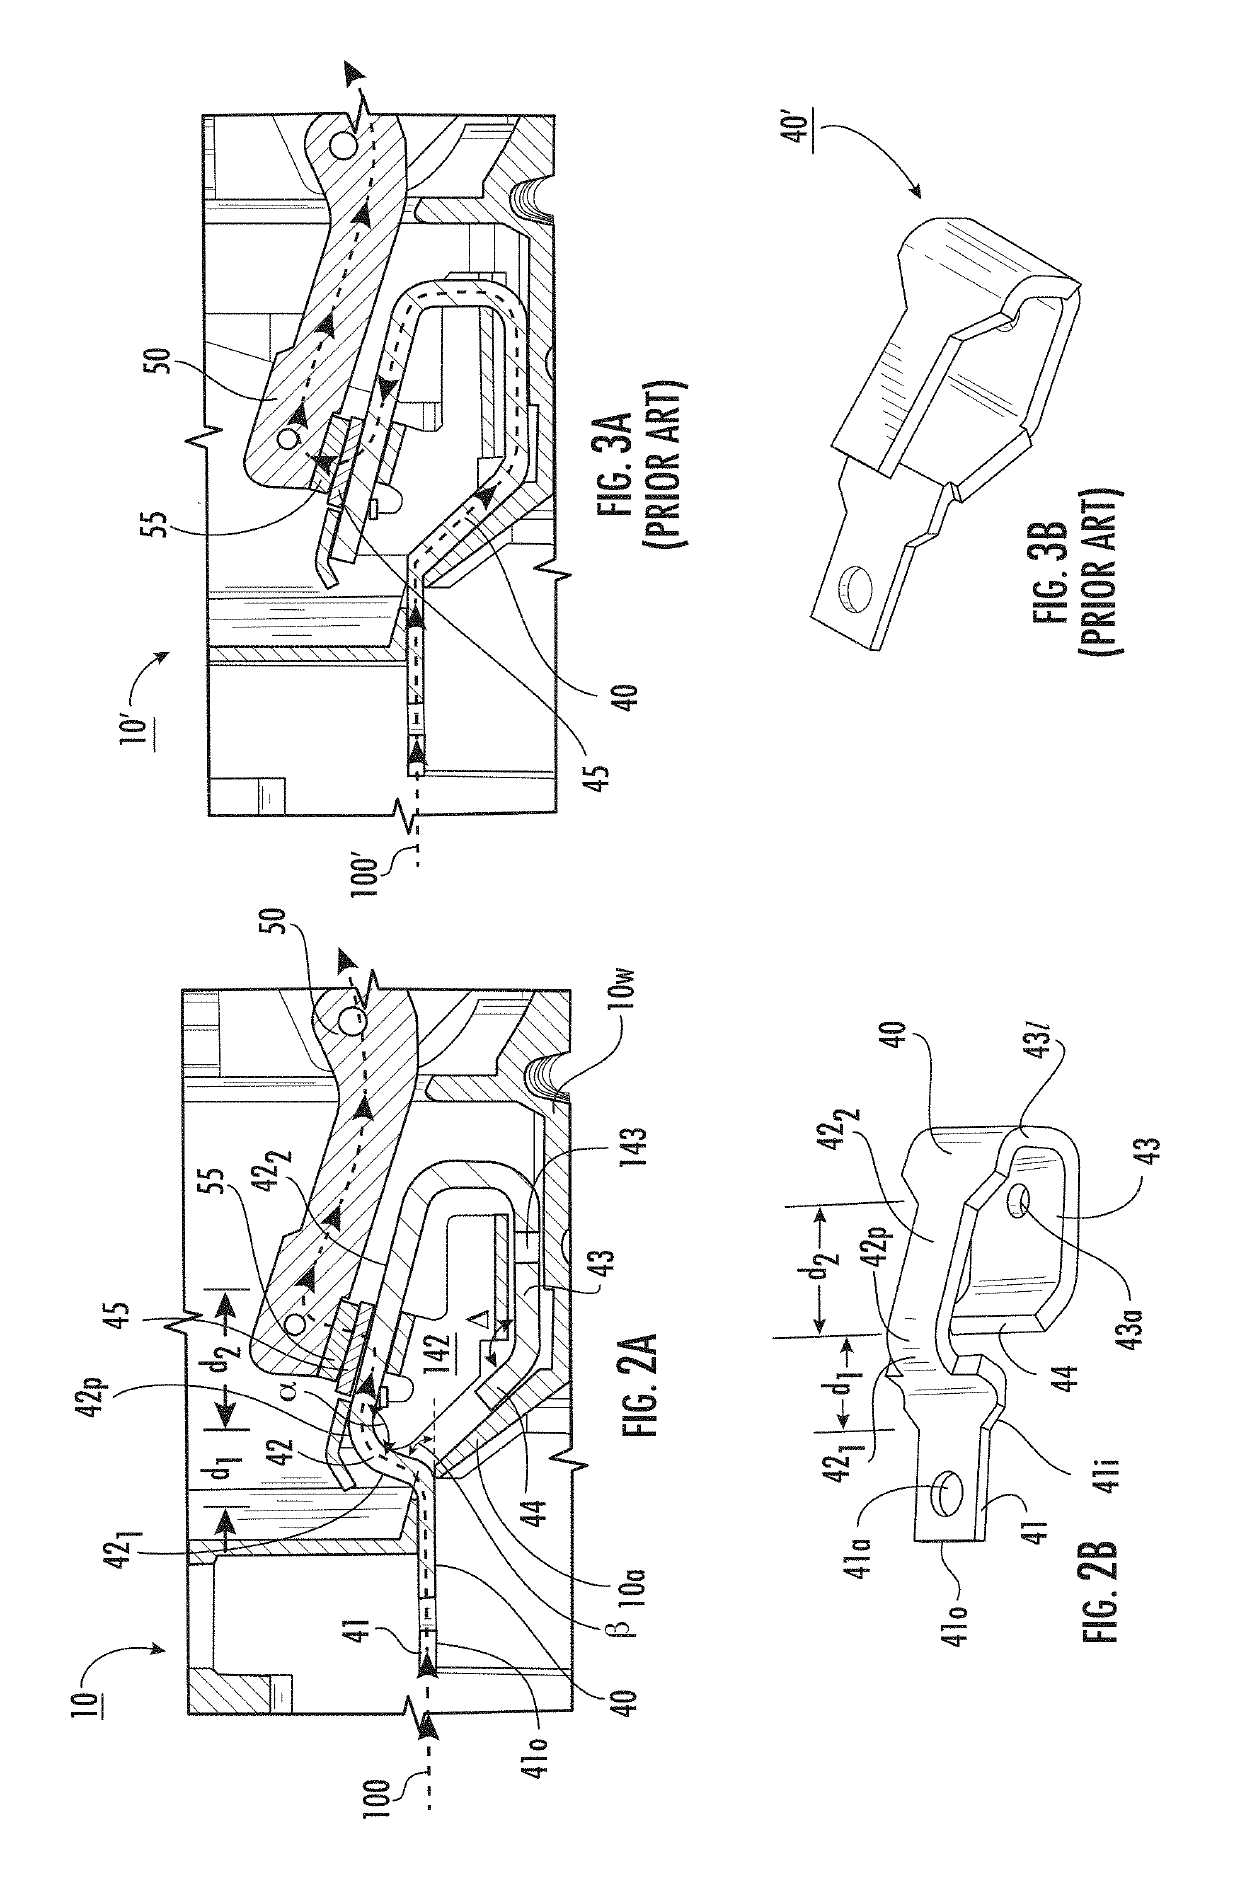 Switch disconnector systems suitable for molded case circuit breakers and related methods